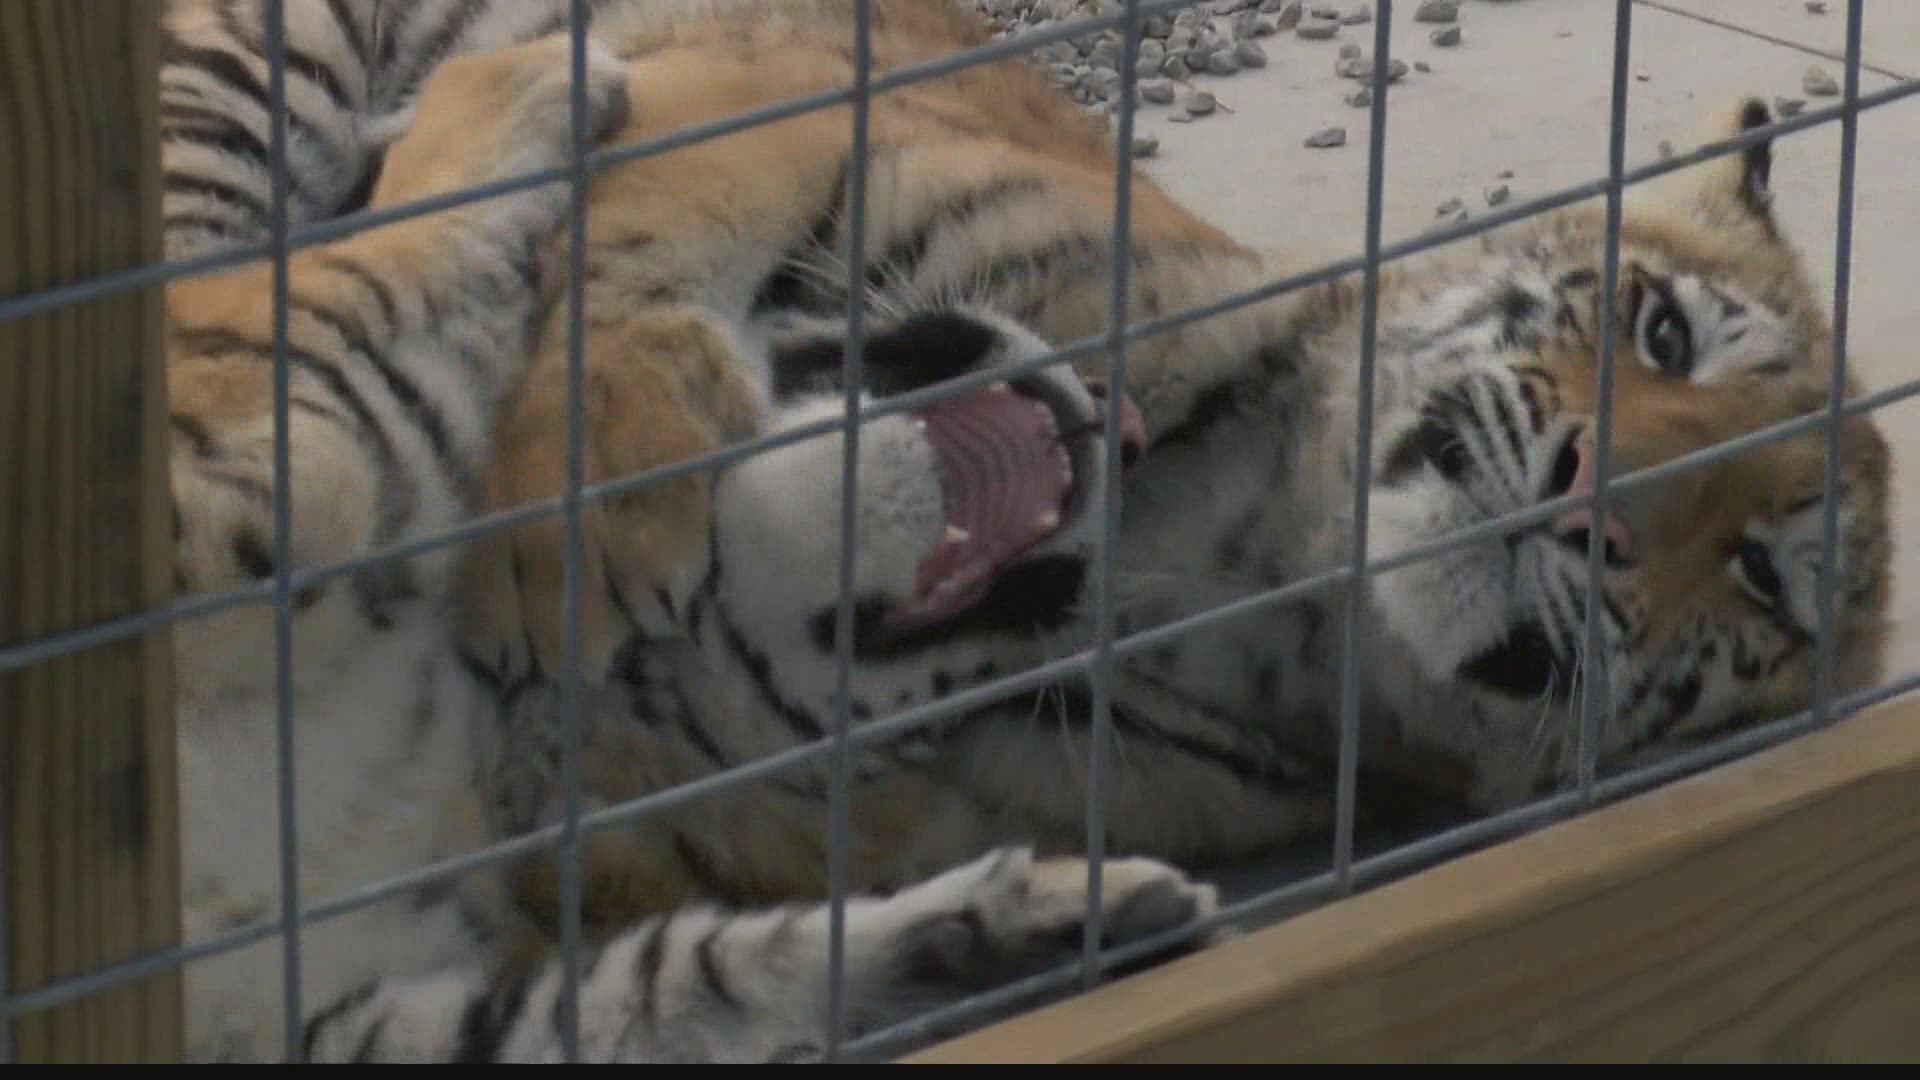 Indianapolis Zoo is helping find new homes for the more than 200 animals being removed from “Wildlife In Need,” a roadside zoo in Southern Indiana owned by Tim Stark